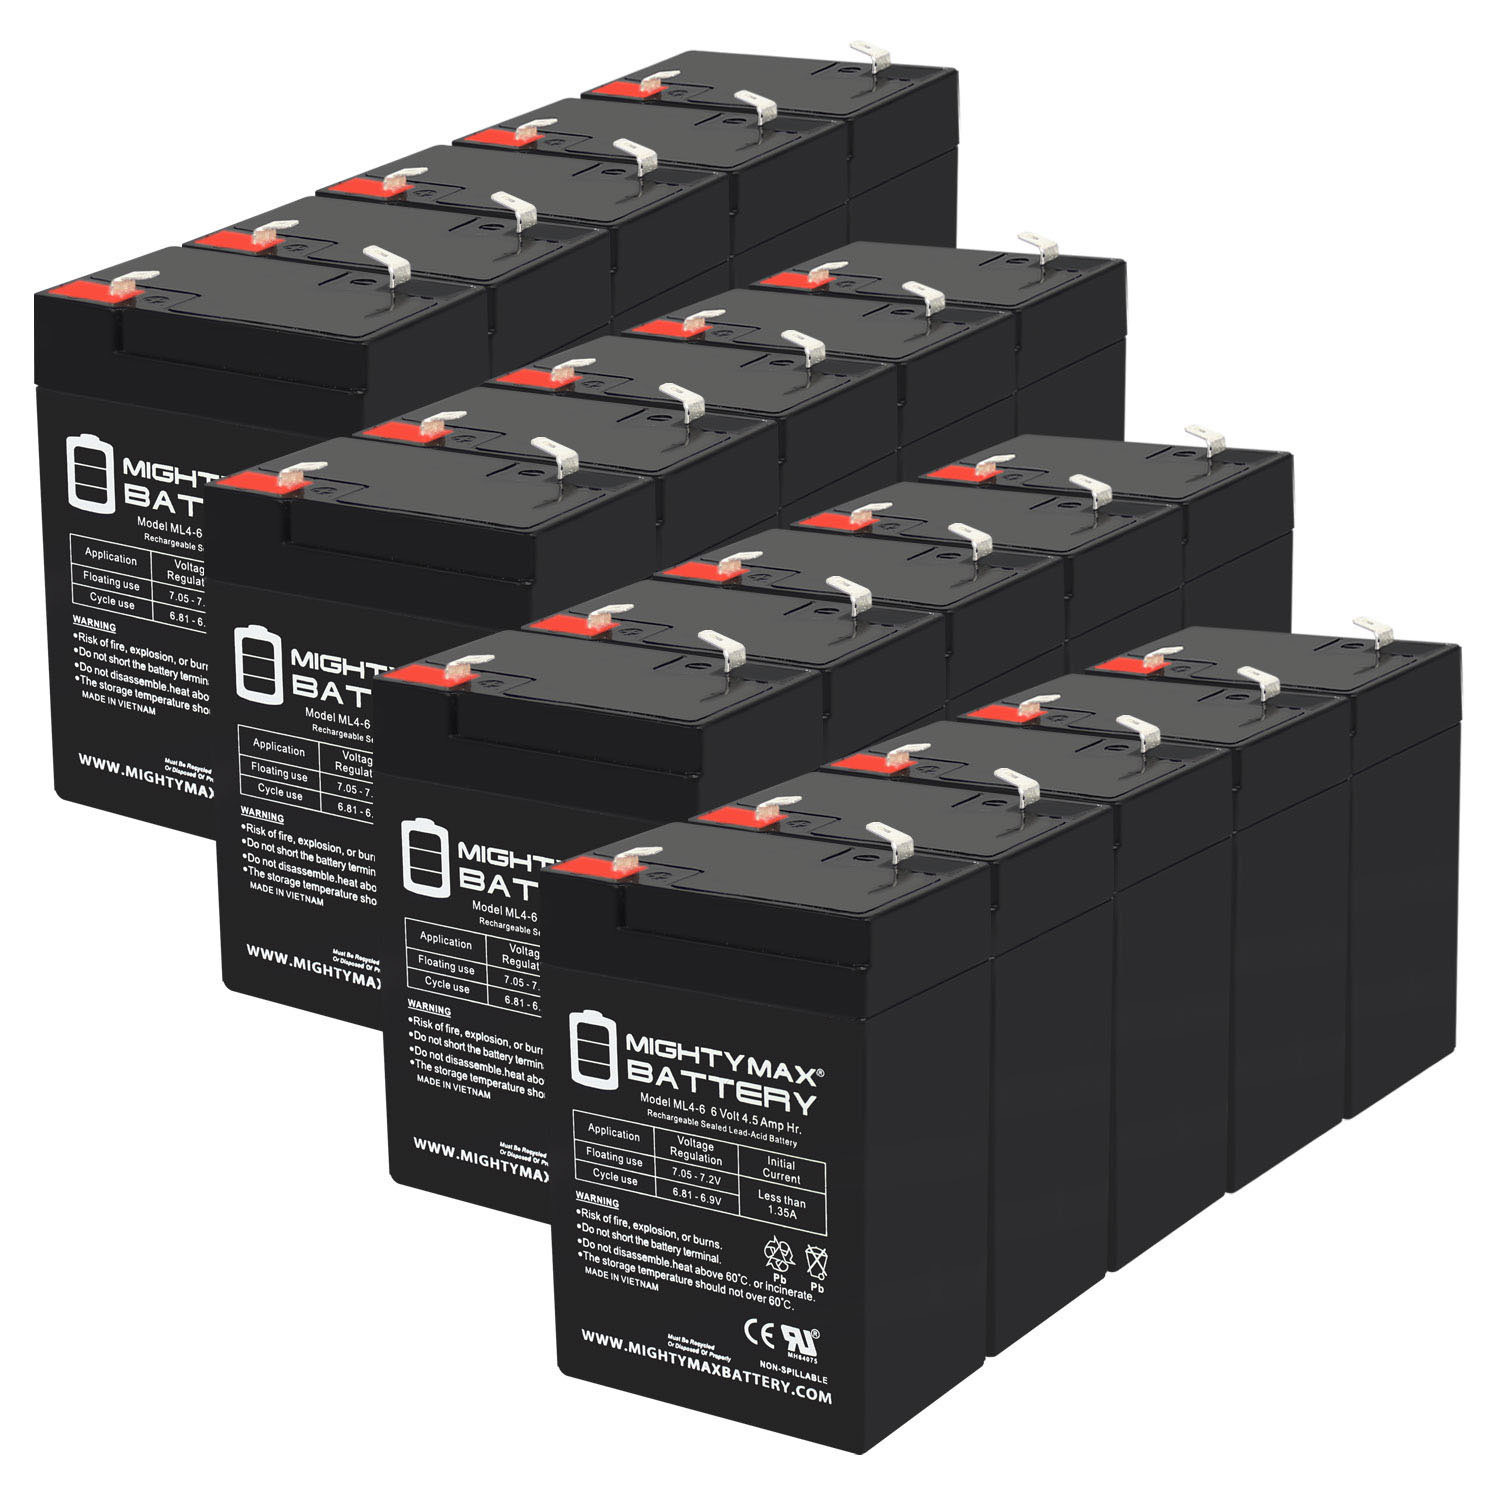 6V 4.5AH SLA Replacement Battery for Dual-Lite Wep - 20 Pack